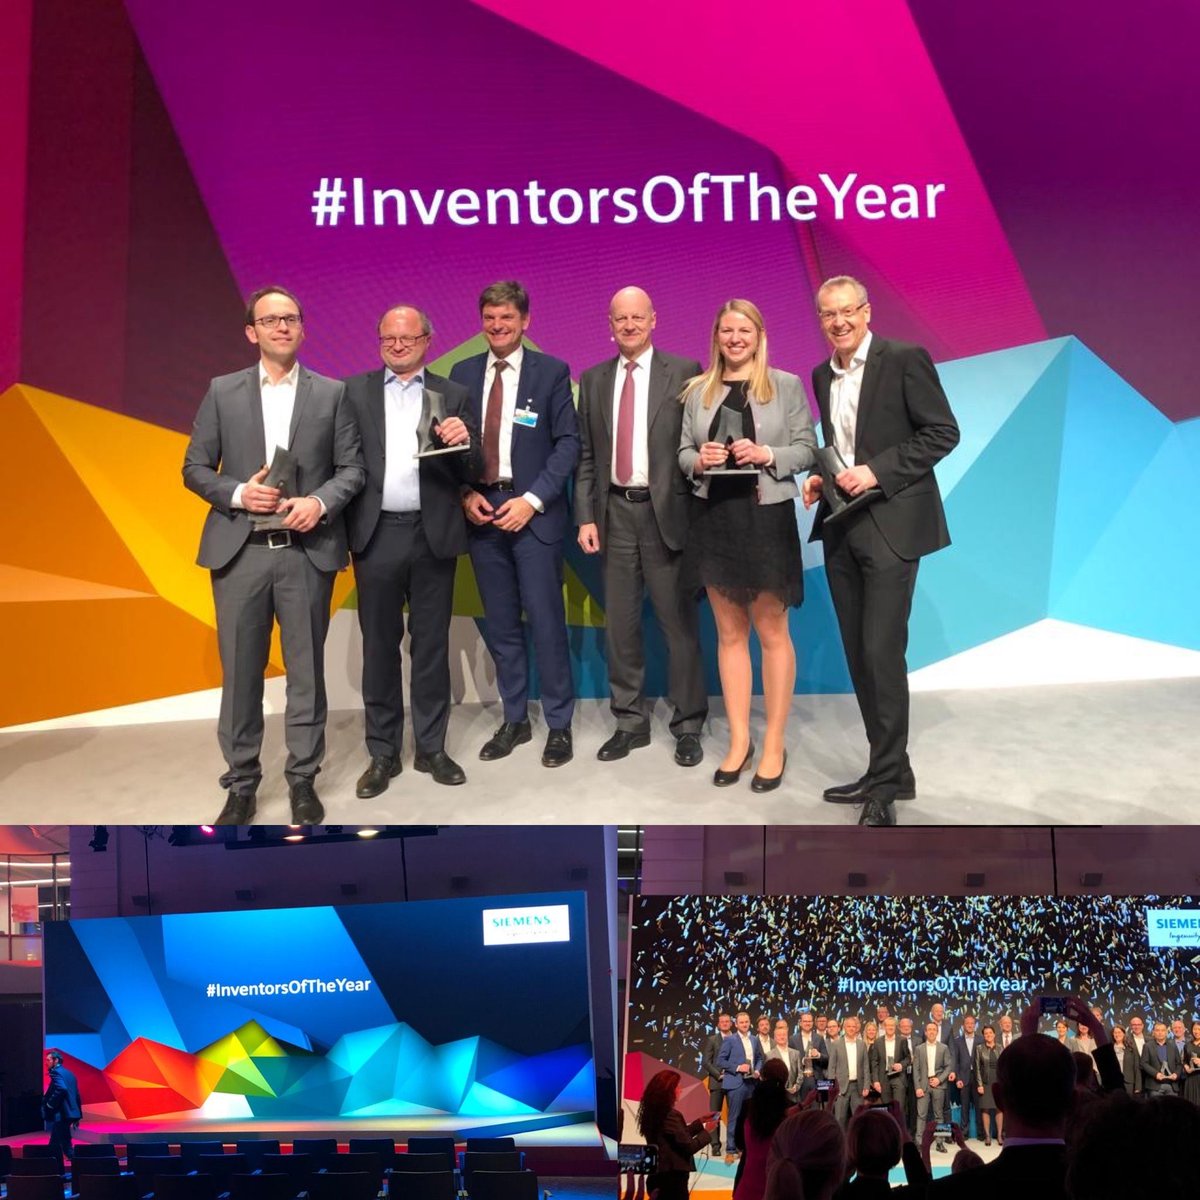 Tonight FAU Digital Tech Academy participated in the Siemens Inventors of the year event at their headquarter in Munich where FAU Professor Peter Wasserscheid received the Inventors of the year award#unifau #siemens #inventorsoftheyear #faudta #innovation